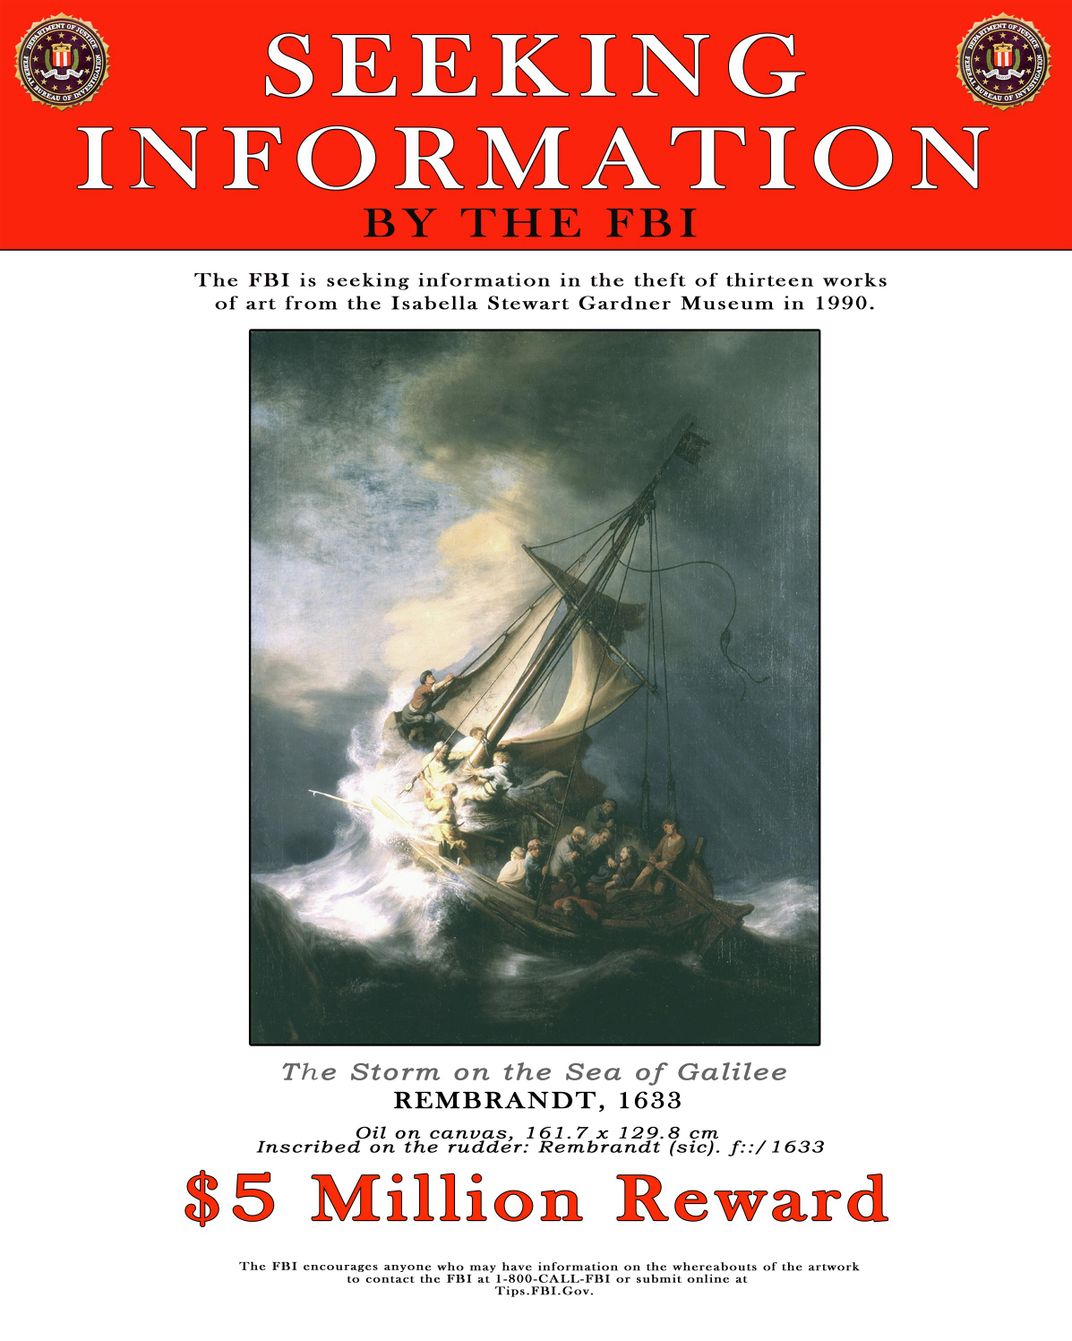 A poster with a red banner on top reads SEEKING INFORMATION BY THE FBI, with a reproduction of a painting of a ship in stormy waters